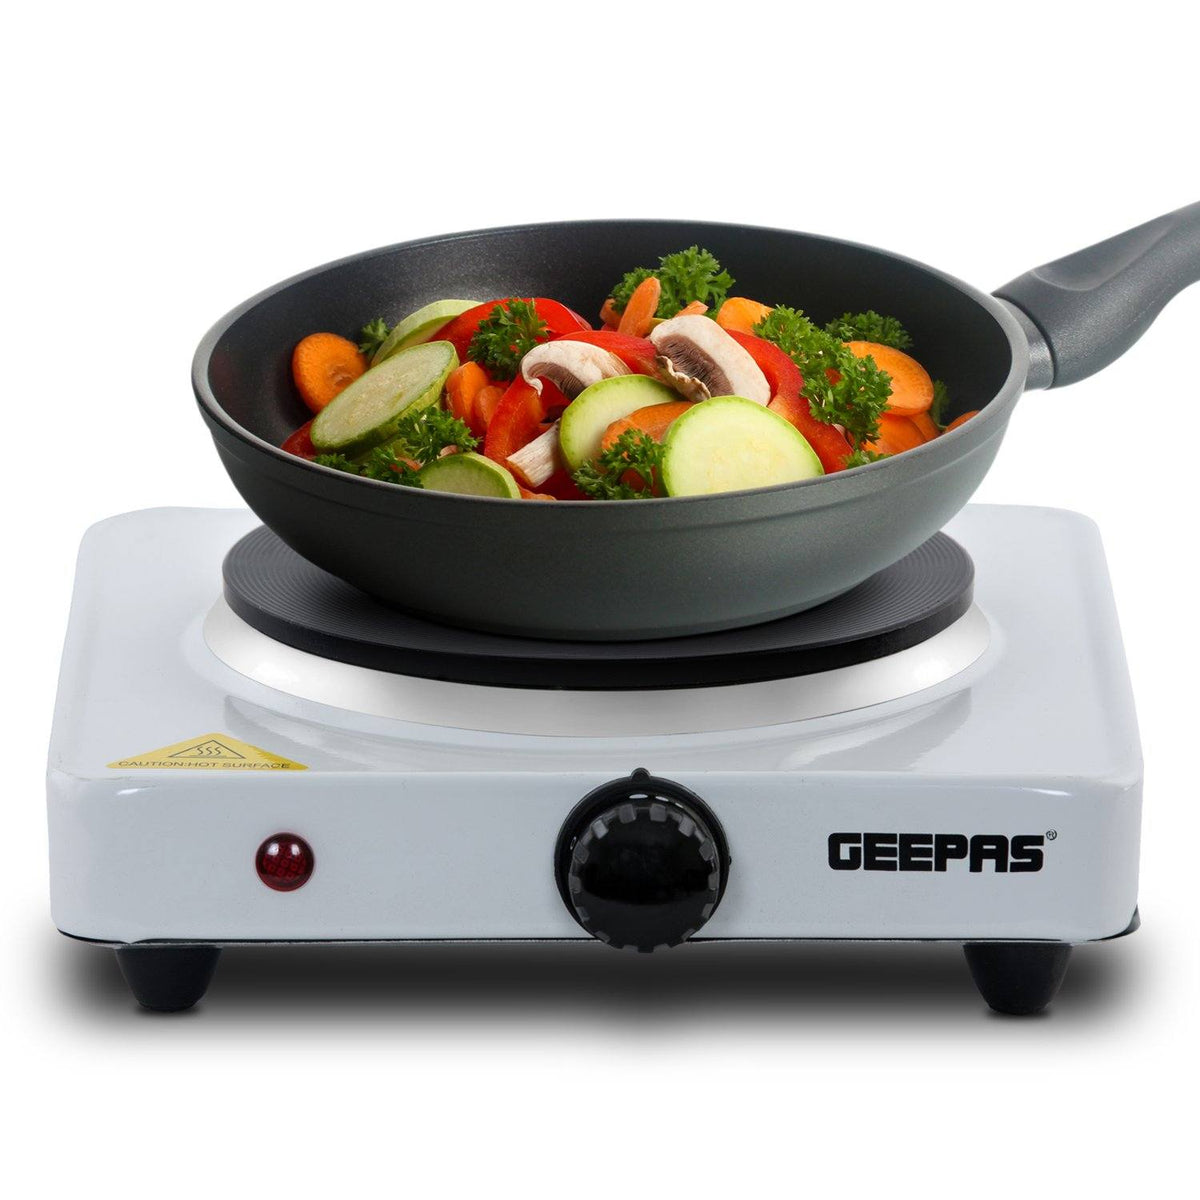 The image shows off the single electric portable hot plate with a frying pan and vegetables inside of it